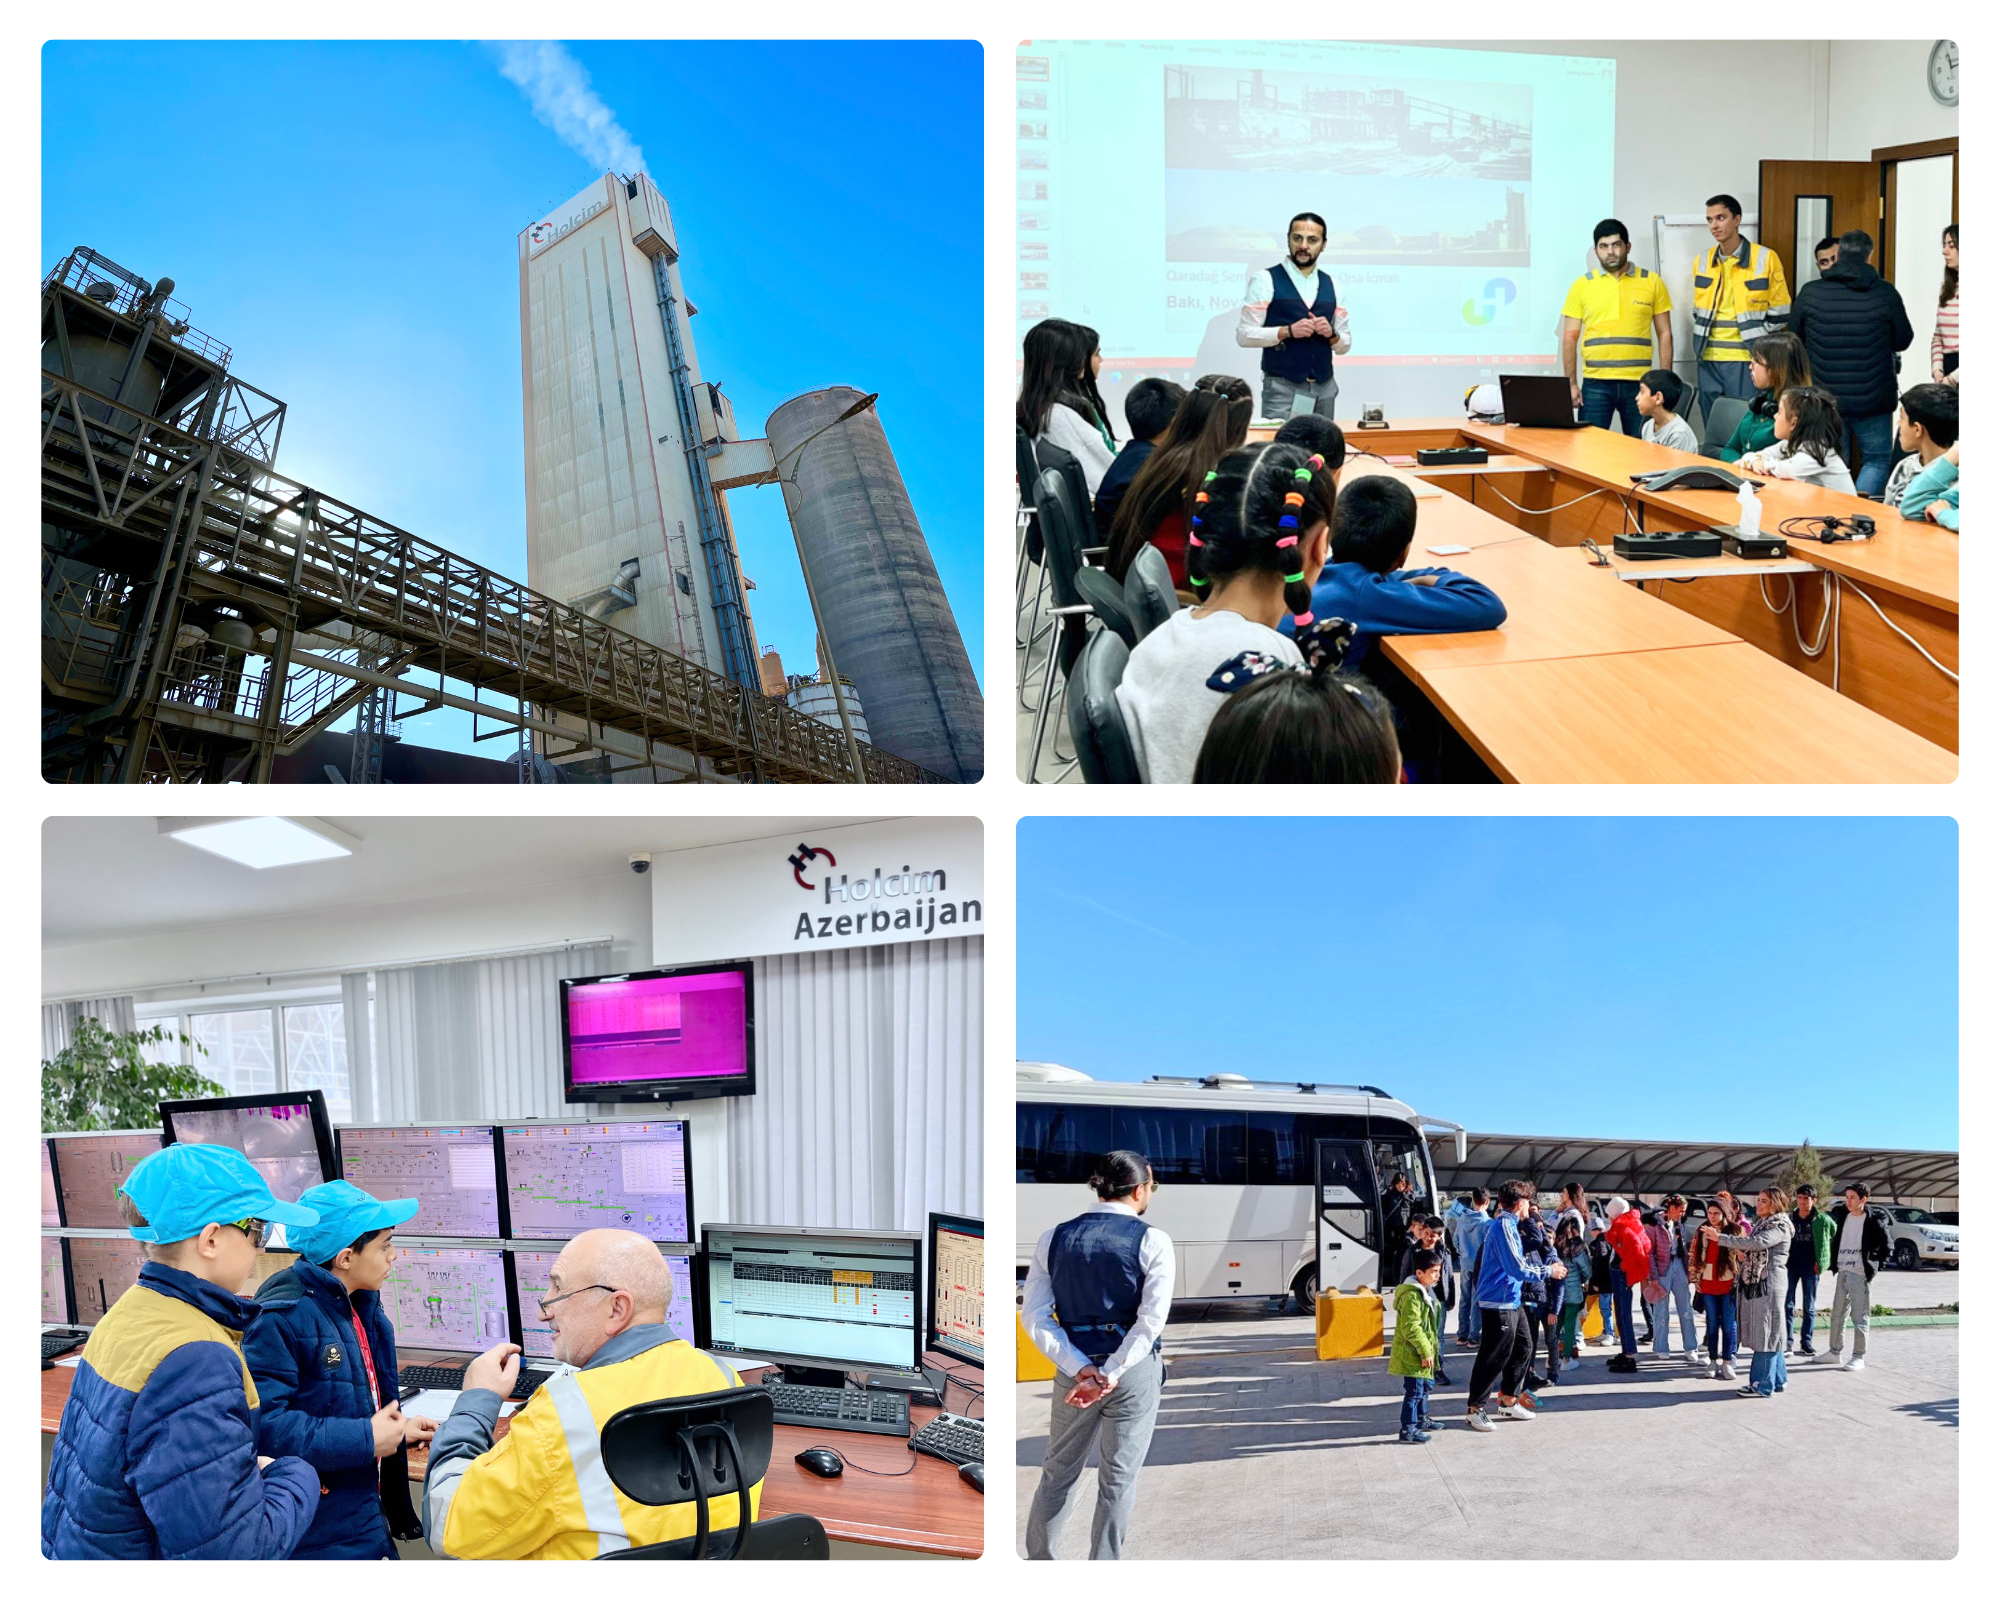 “Holcim” Azerbaijan hosted a study trip program to the Holcim factory for the joint Social Project of AFchamber and ALSTOM “Career Orientation Days for Orphans”.